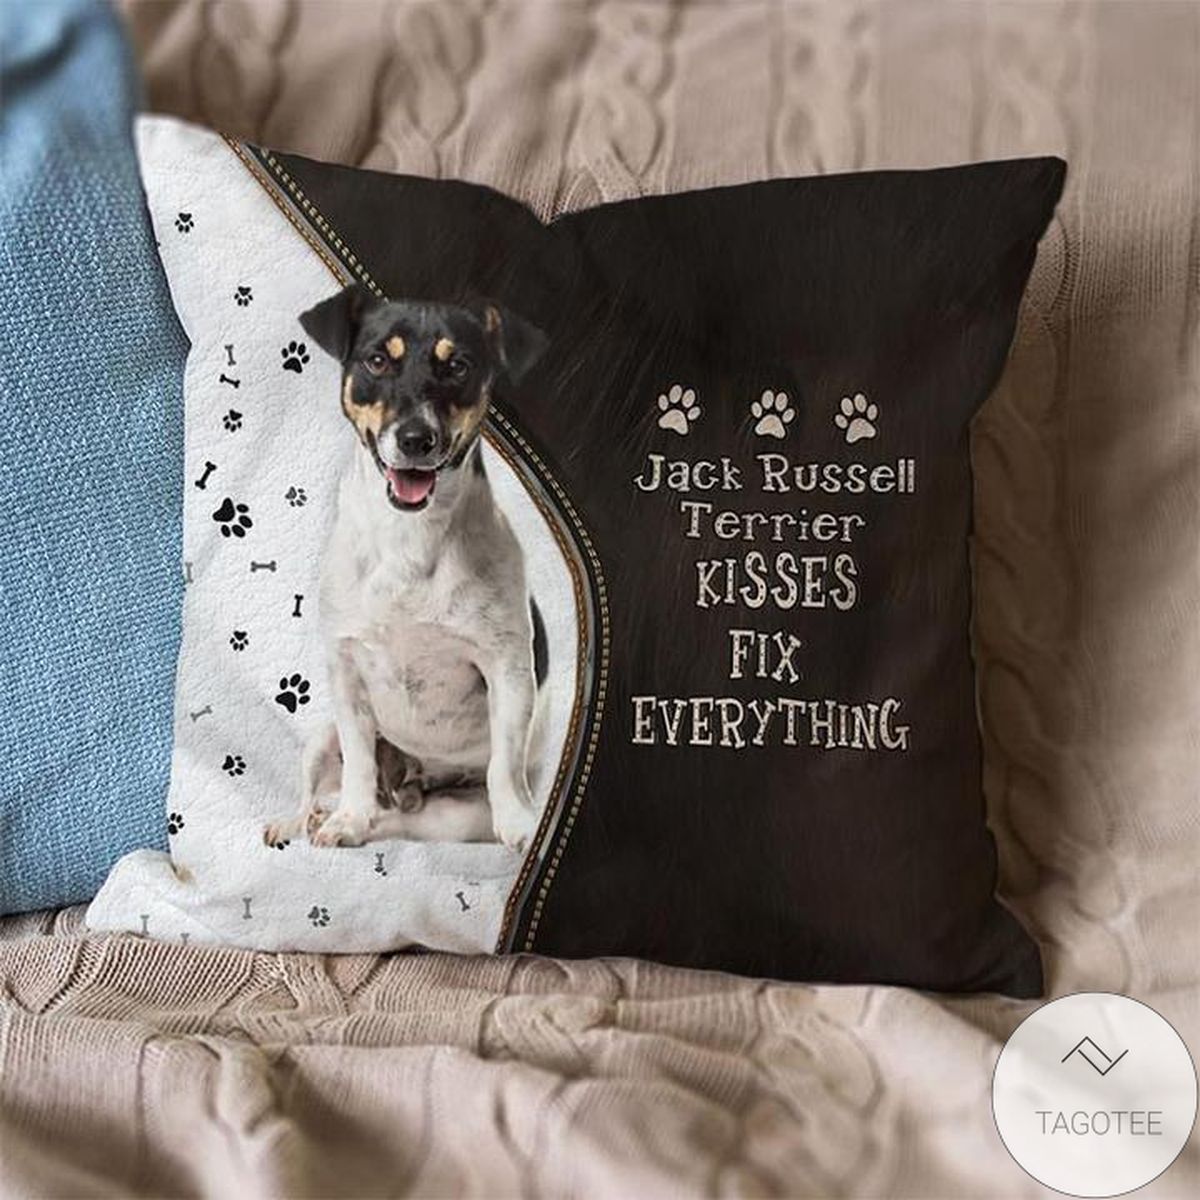 Jack Russell Terrier Kisses Fix Everything Pillowcase